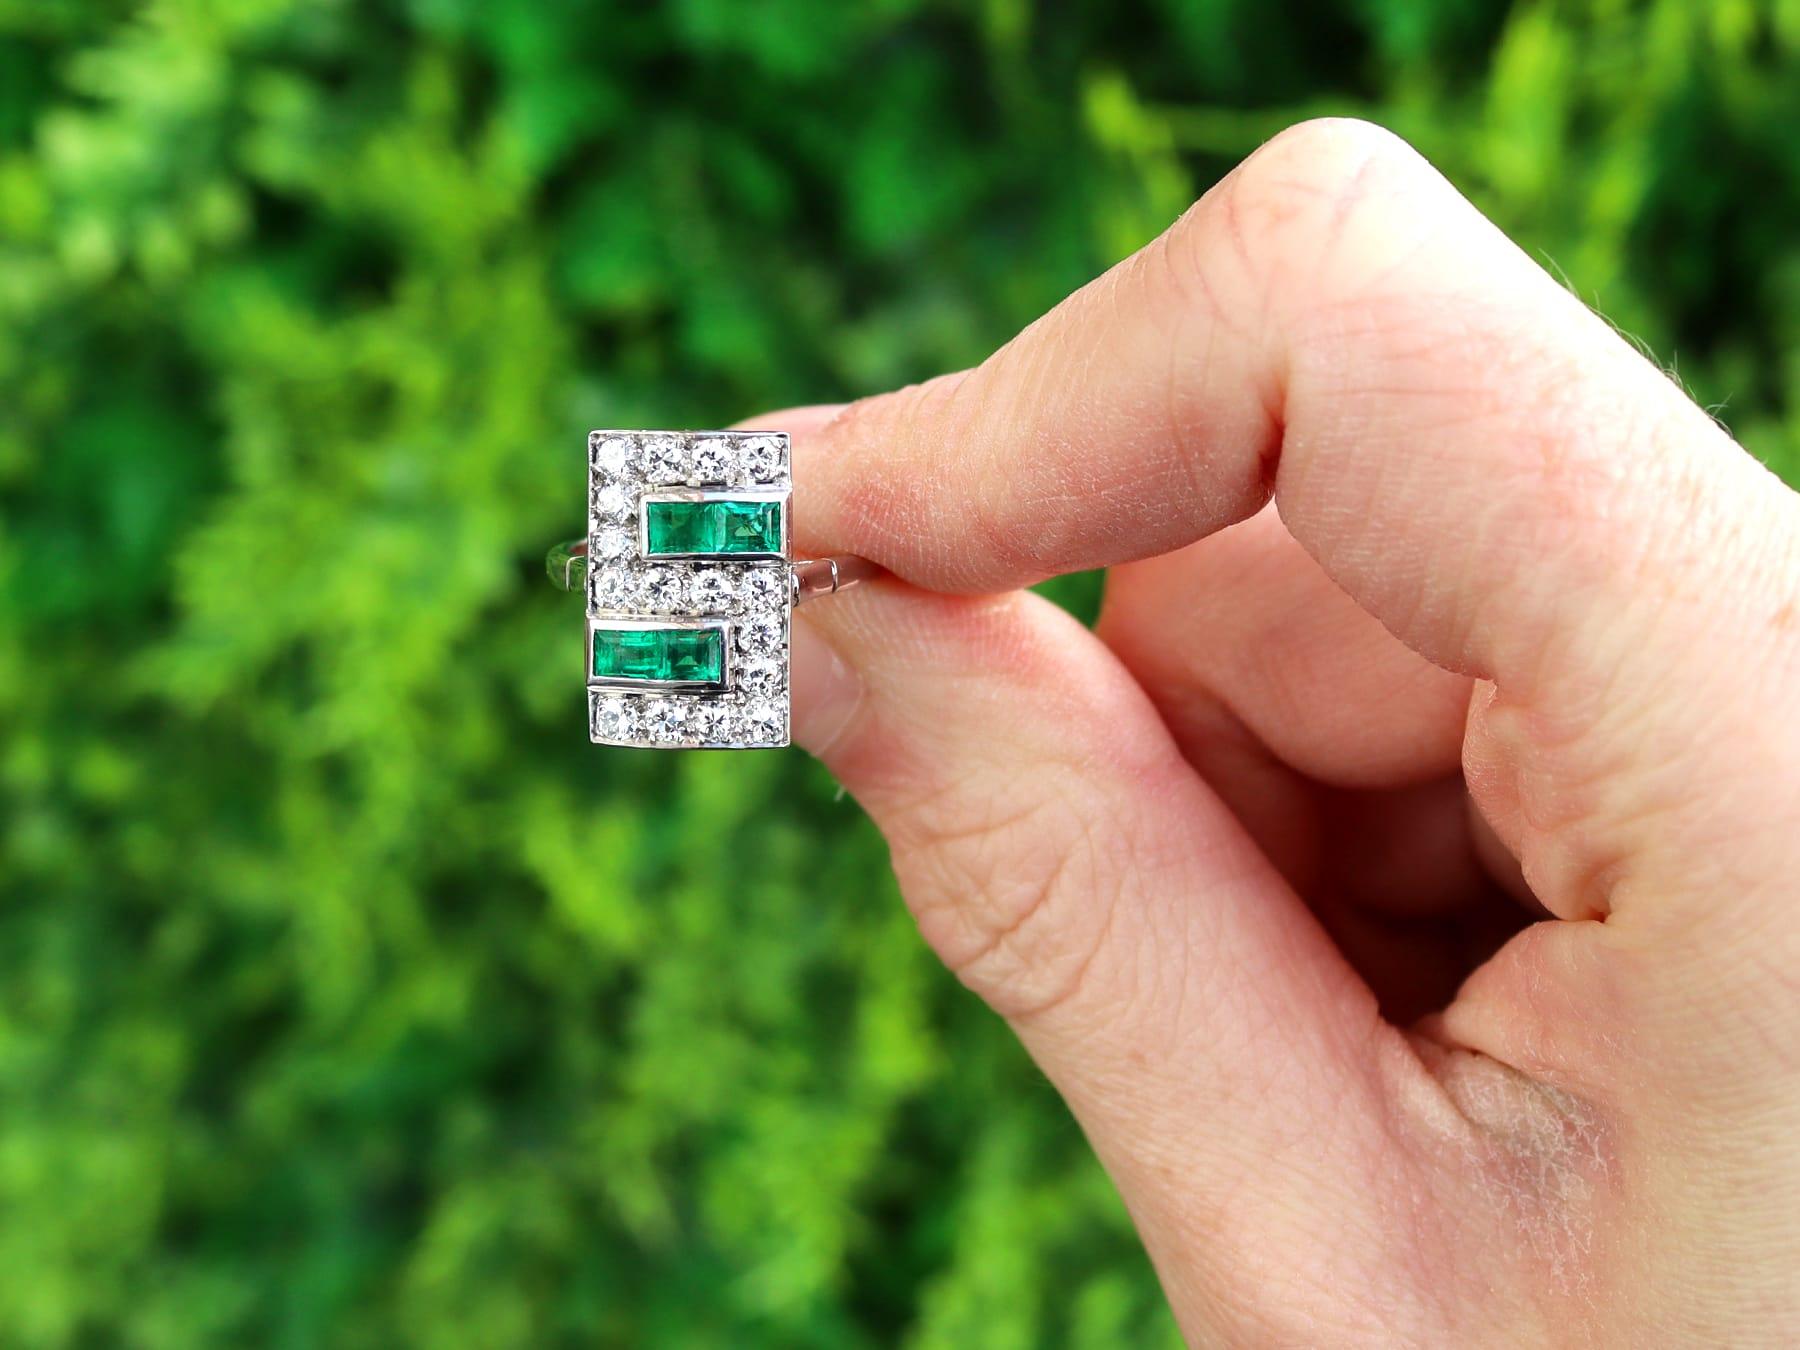 A stunning antique 0.48 carat emerald and 1.12 carat diamond, platinum Art Deco cocktail ring; part of our diverse antique jewellery and estate jewelry collections

This stunning, fine and impressive antique Art Deco emerald and diamond dress ring